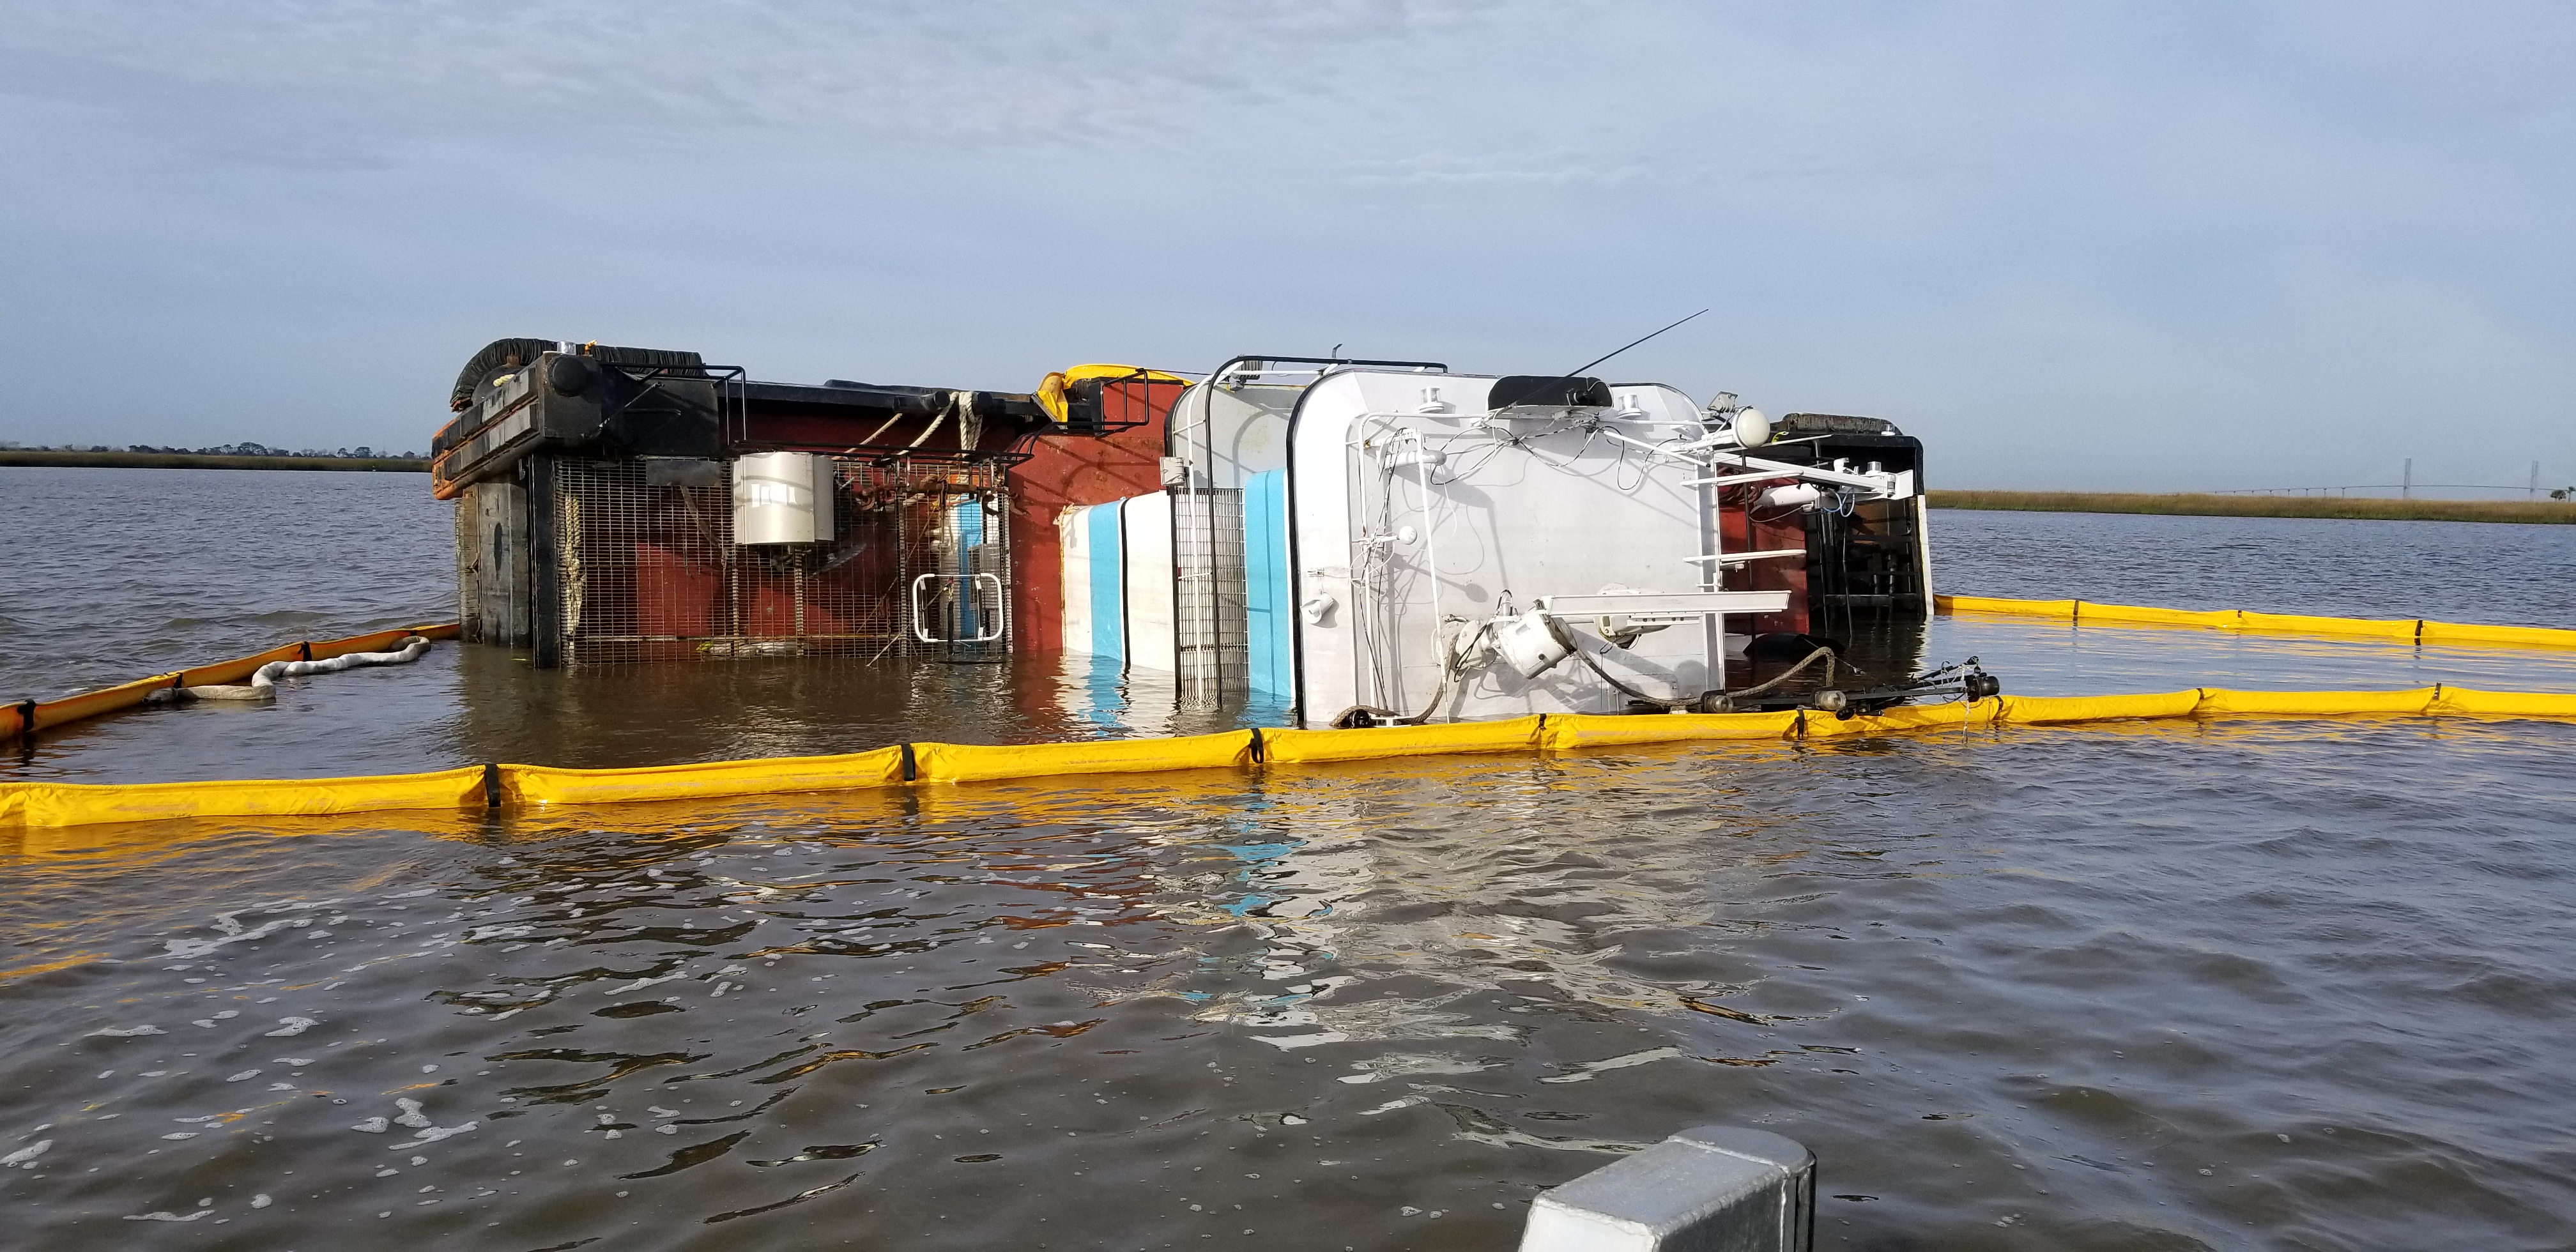 The Miss Addison, a 56-foot tug boat, is overturned on its port side in Jekyll Creek west of Jekyll Island, Ga., on Thursday, Jan. 3, 2019. Sam LaBarba/Georgia Department of Natural Resources.